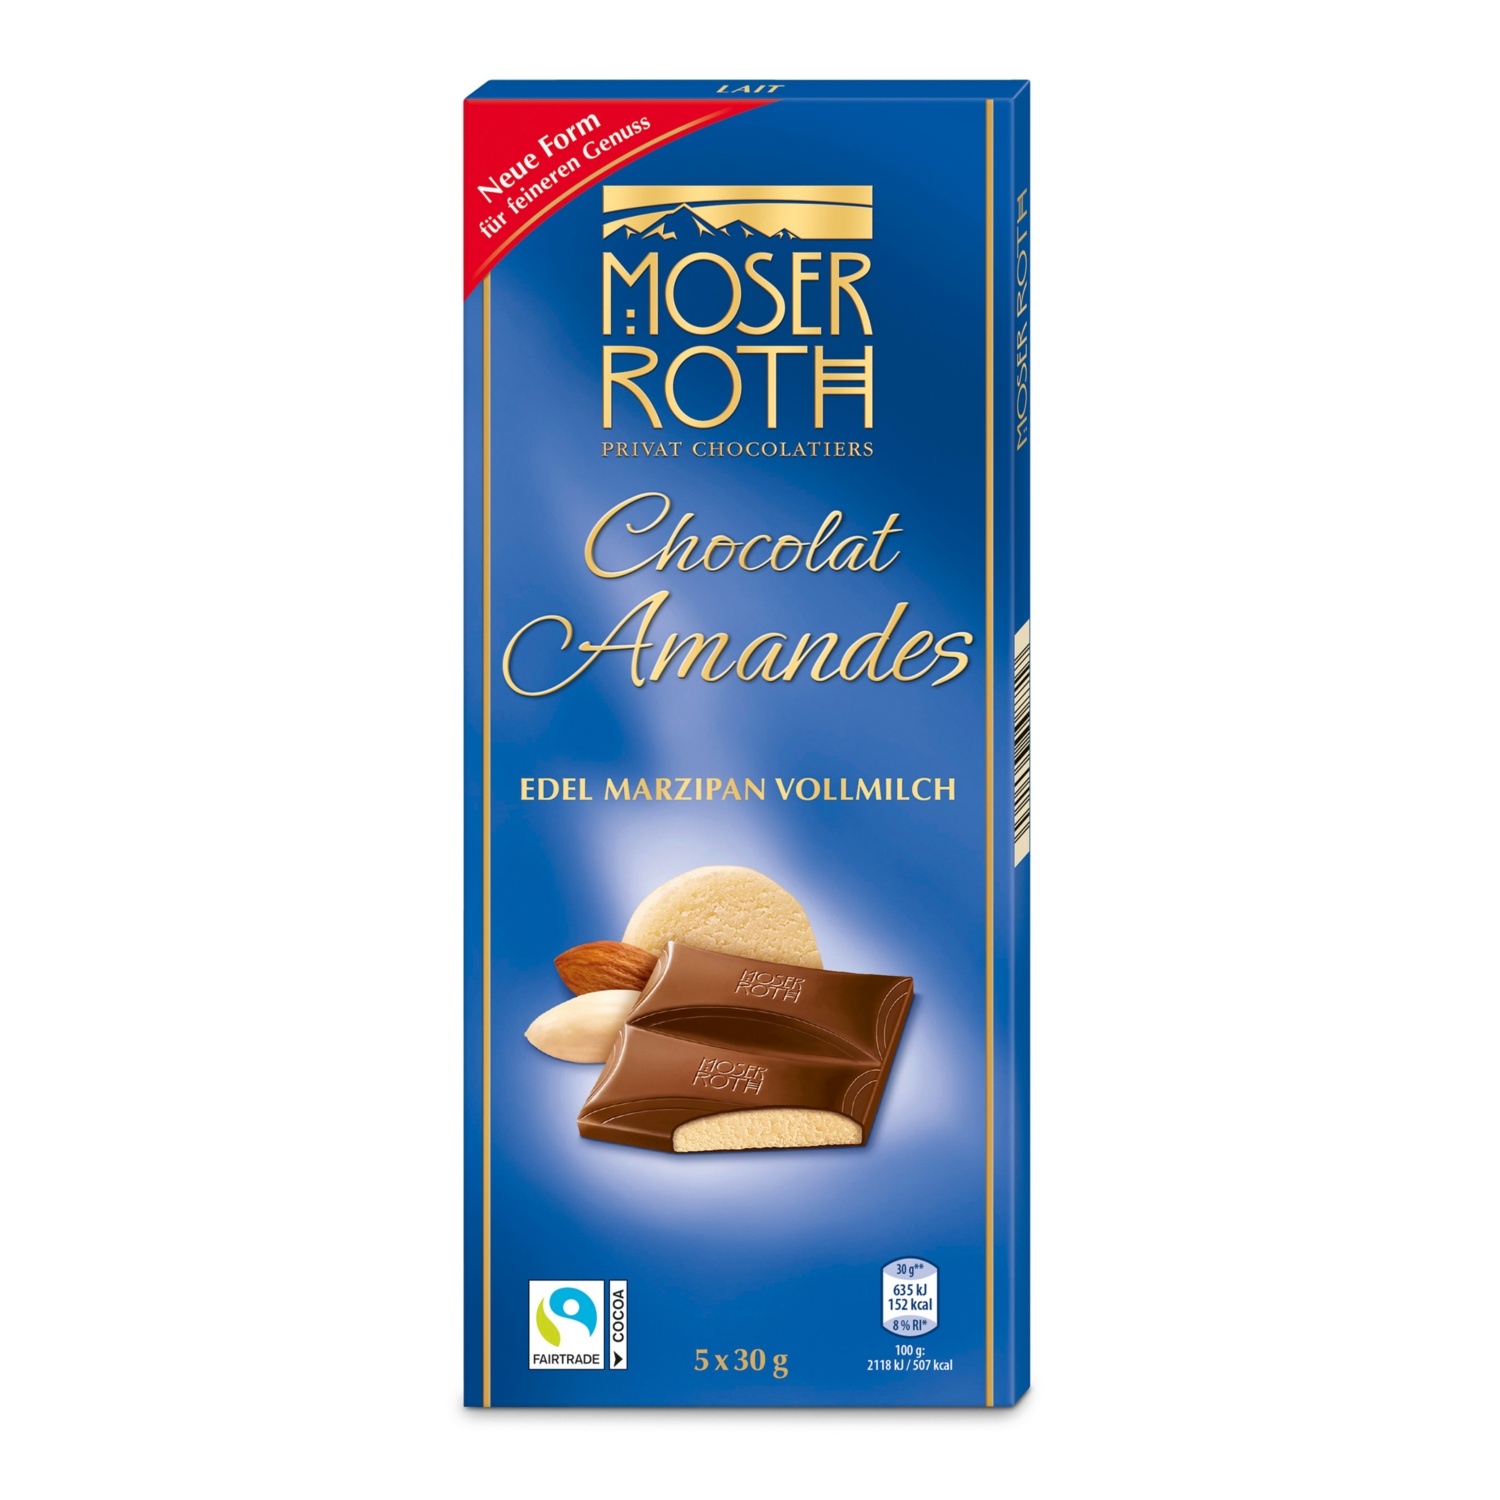 MOSER ROTH Chocolat Amandes, Vollmilch-Marzipan